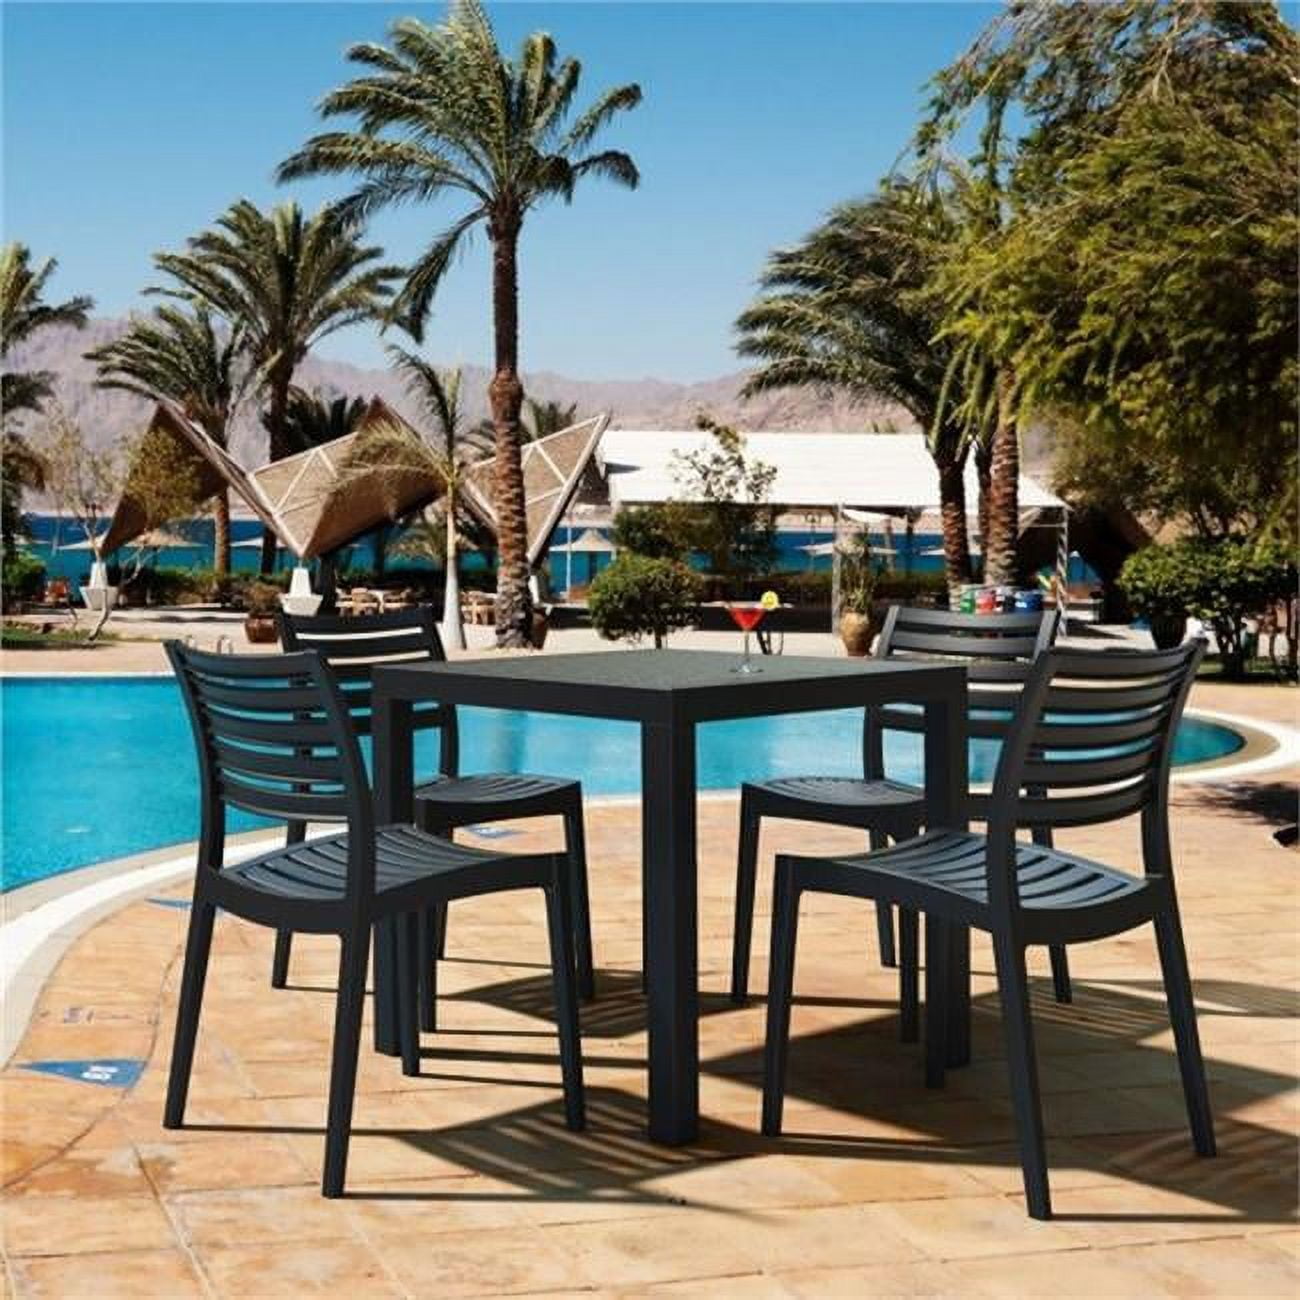 Isp1641s-bla Ares Resin Square Dining Set With 4 Chairs, Black